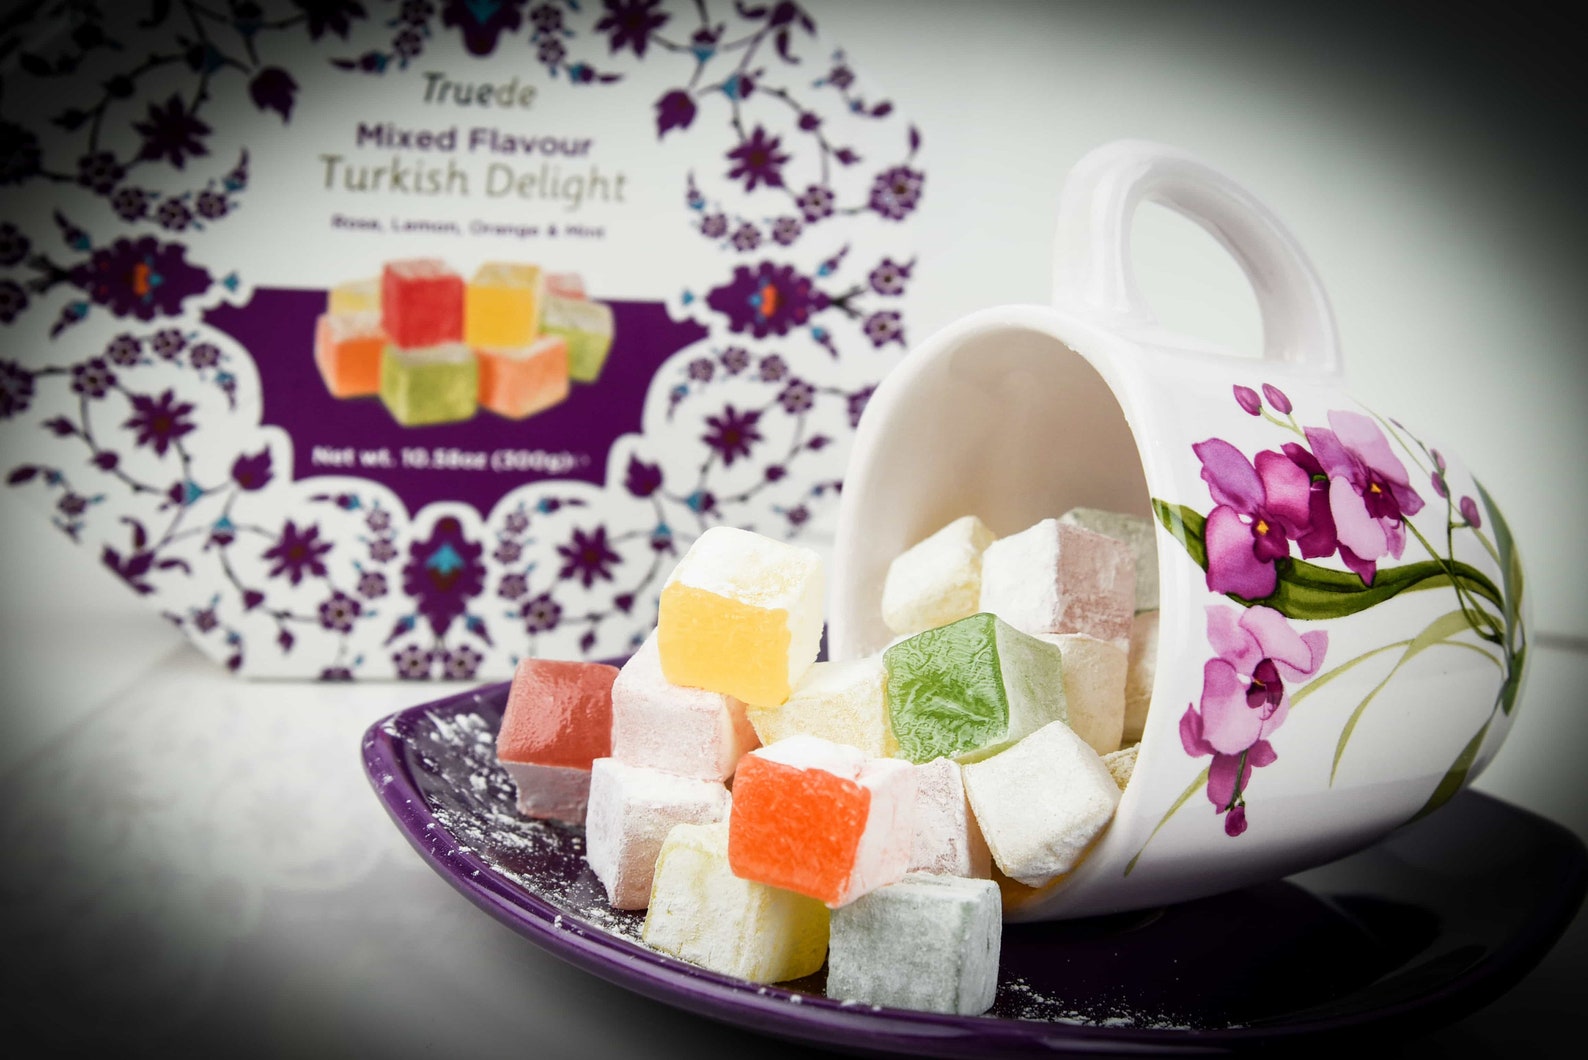 Eid Gift 300g Mixed Flavour Turkish Delight Gift